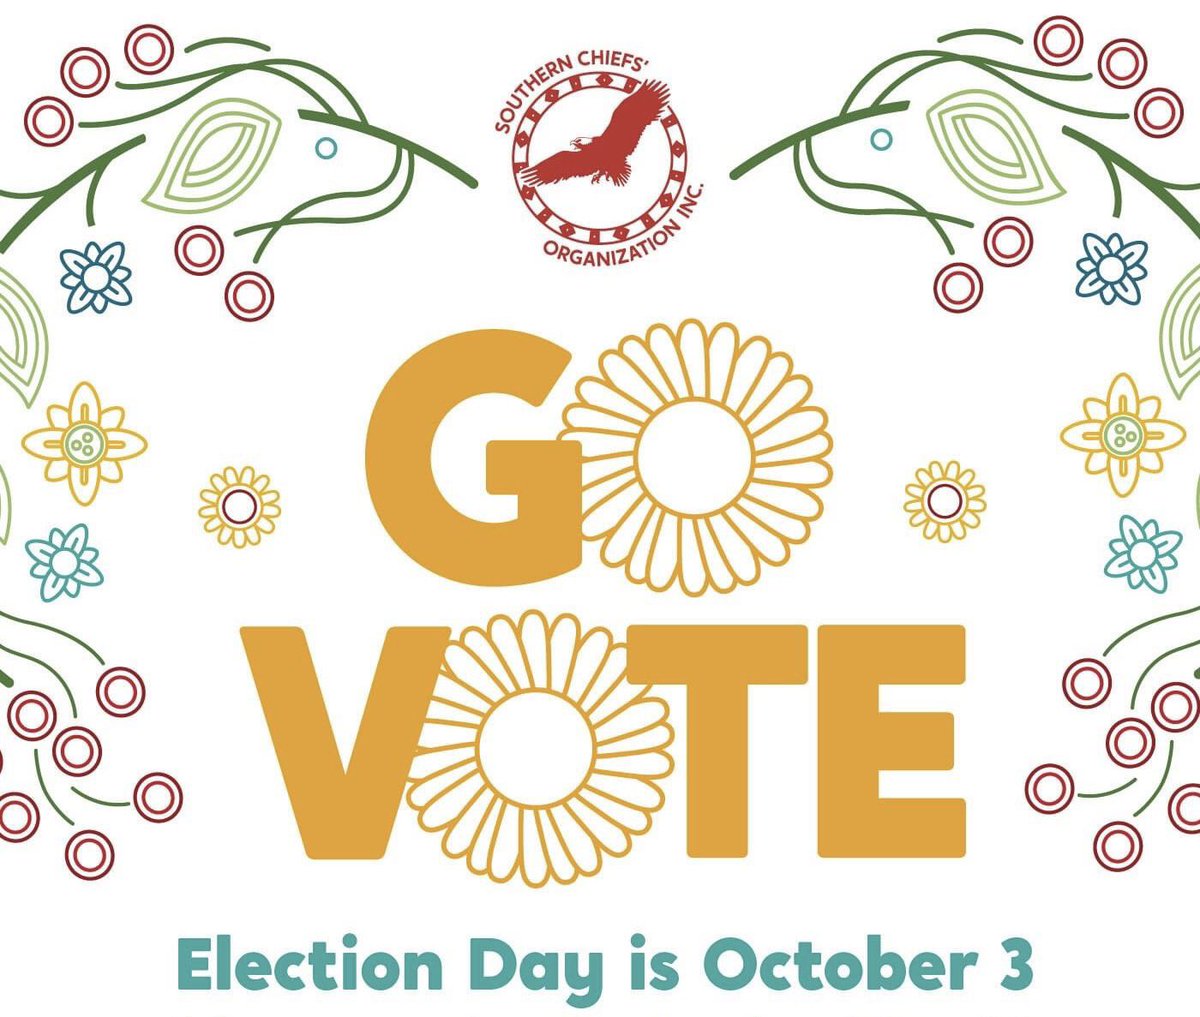 GO VOTE!

The Southern Chiefs' Organization encourages First Nation citizens to vote in the provincial election.

Be sure to vote on Tuesday, Oct 3, 2023. 
scoinc.mb.ca/vote/

#SCOINCMB #SCOYouth #SCOVotes #mbpoli #leadership #election2023 #MBelection2023 #vote #Manitoba